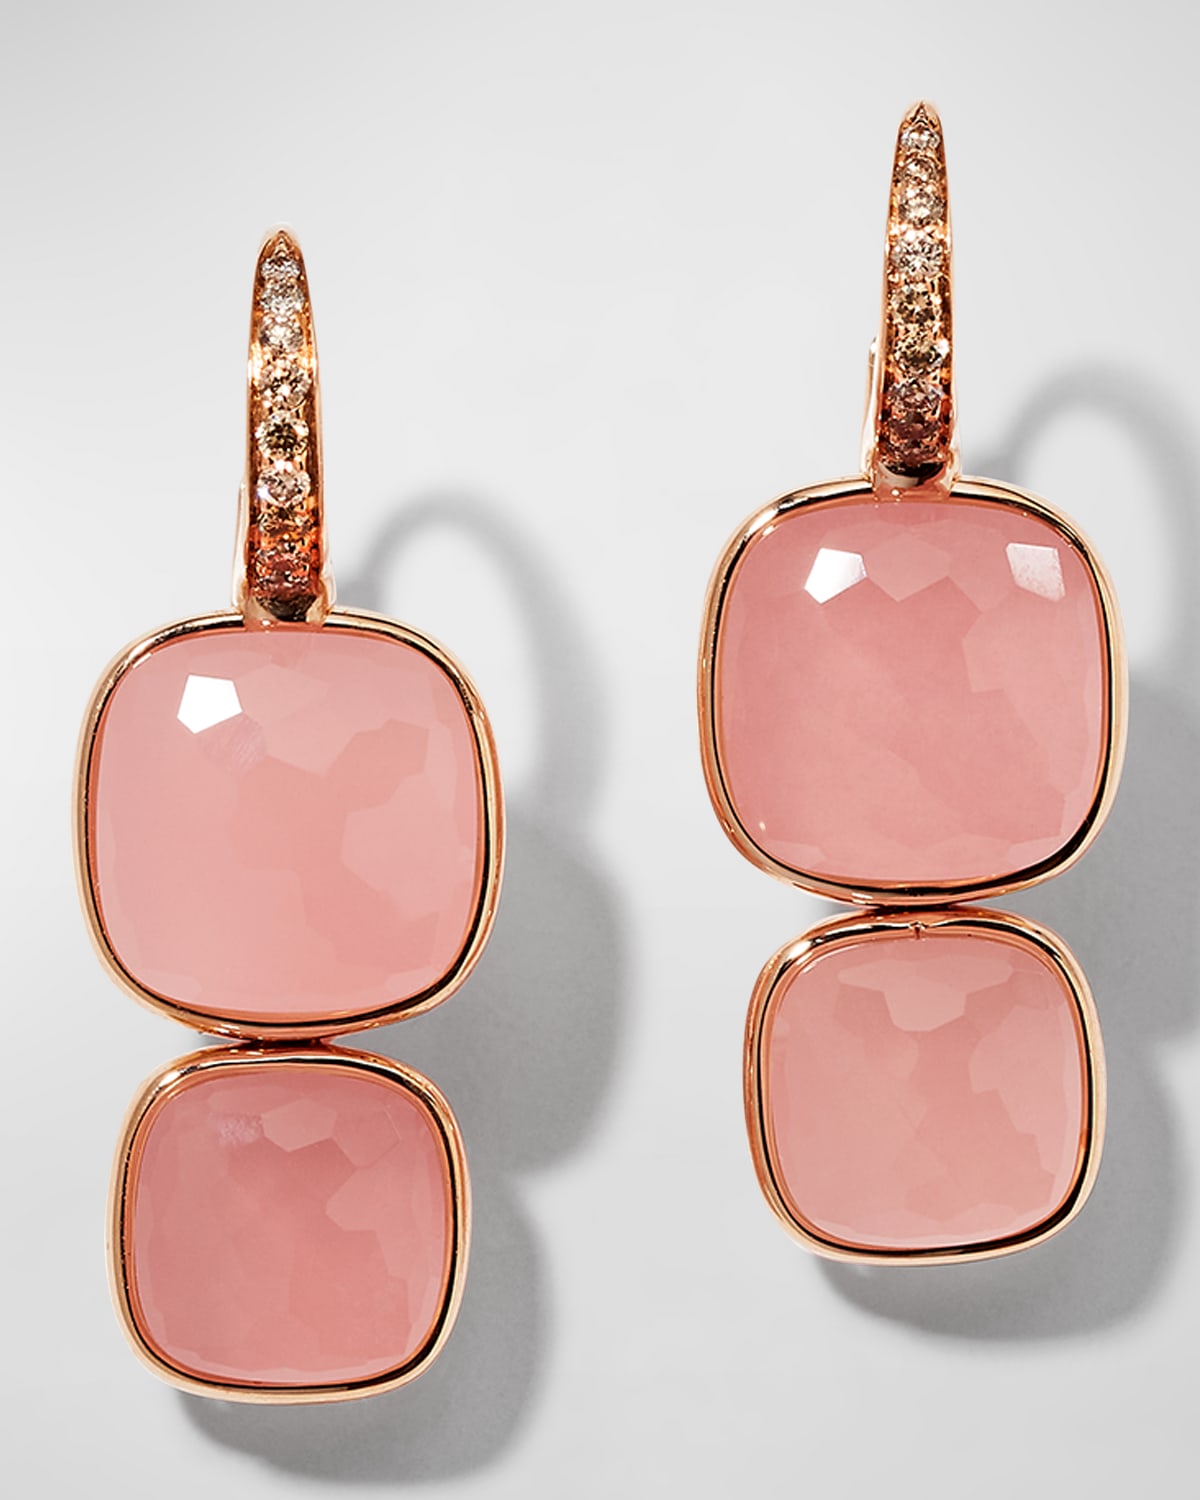 Pomellato Nudo Rose Gold Rose Quartz And Chalcedony Earrings With Diamonds In 15 Rose Gold